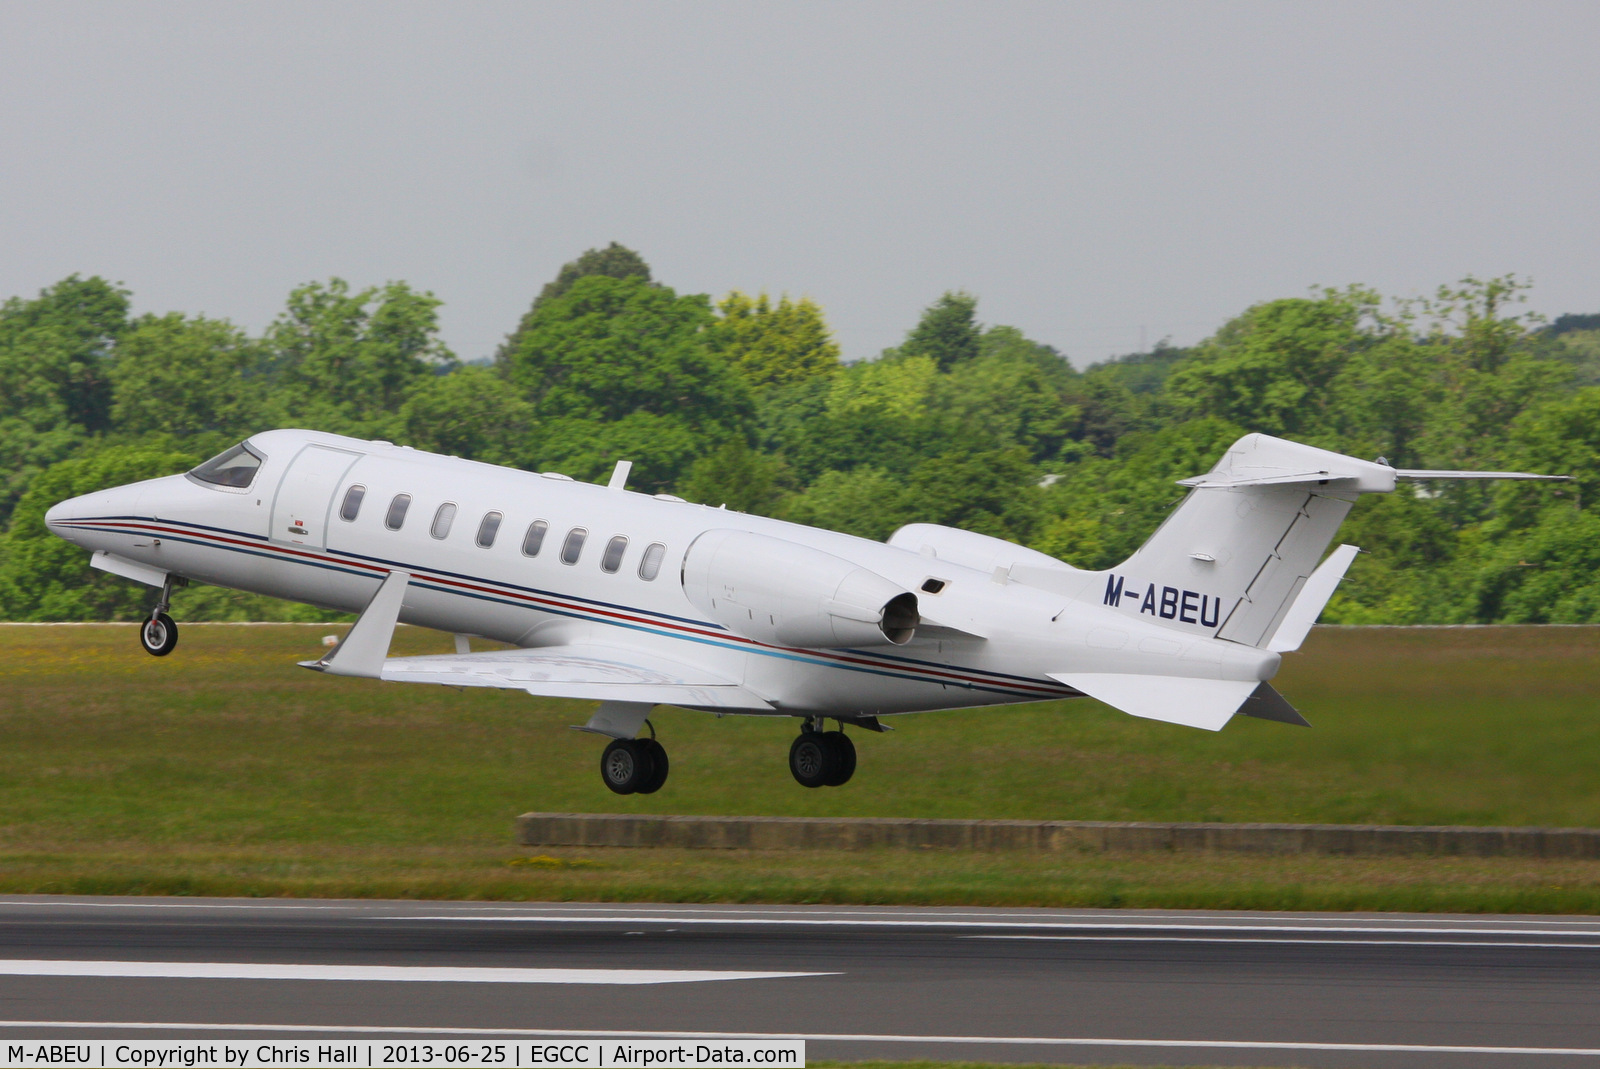 M-ABEU, 2009 Learjet 45 C/N 45-374, used by Ryanair to ferry engineers to repair any problems with their aircraft